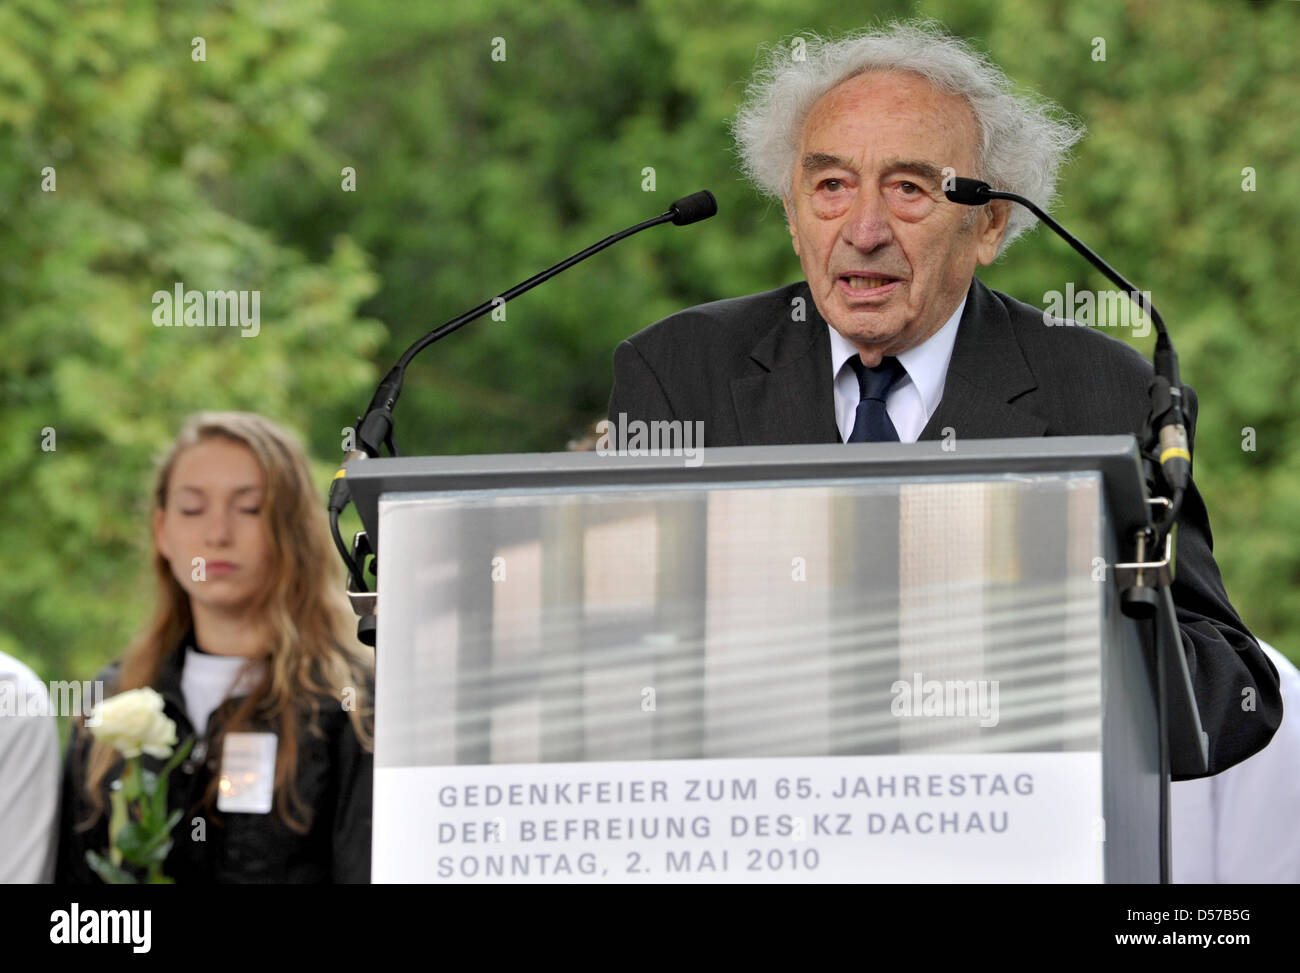 Vice president of Comite International de Dachau (CID) and concentration camp survivor, Max Mannheimer talks during the memorial ceremony, on the occaision of the 65th anniversary of the release of concentration camp in Dachau, Germany, 02 May 2010. Survivors of the concentration camp remember the release 65 years ago. Dachau was the first big concentration camp of the Nazis. Photo Stock Photo